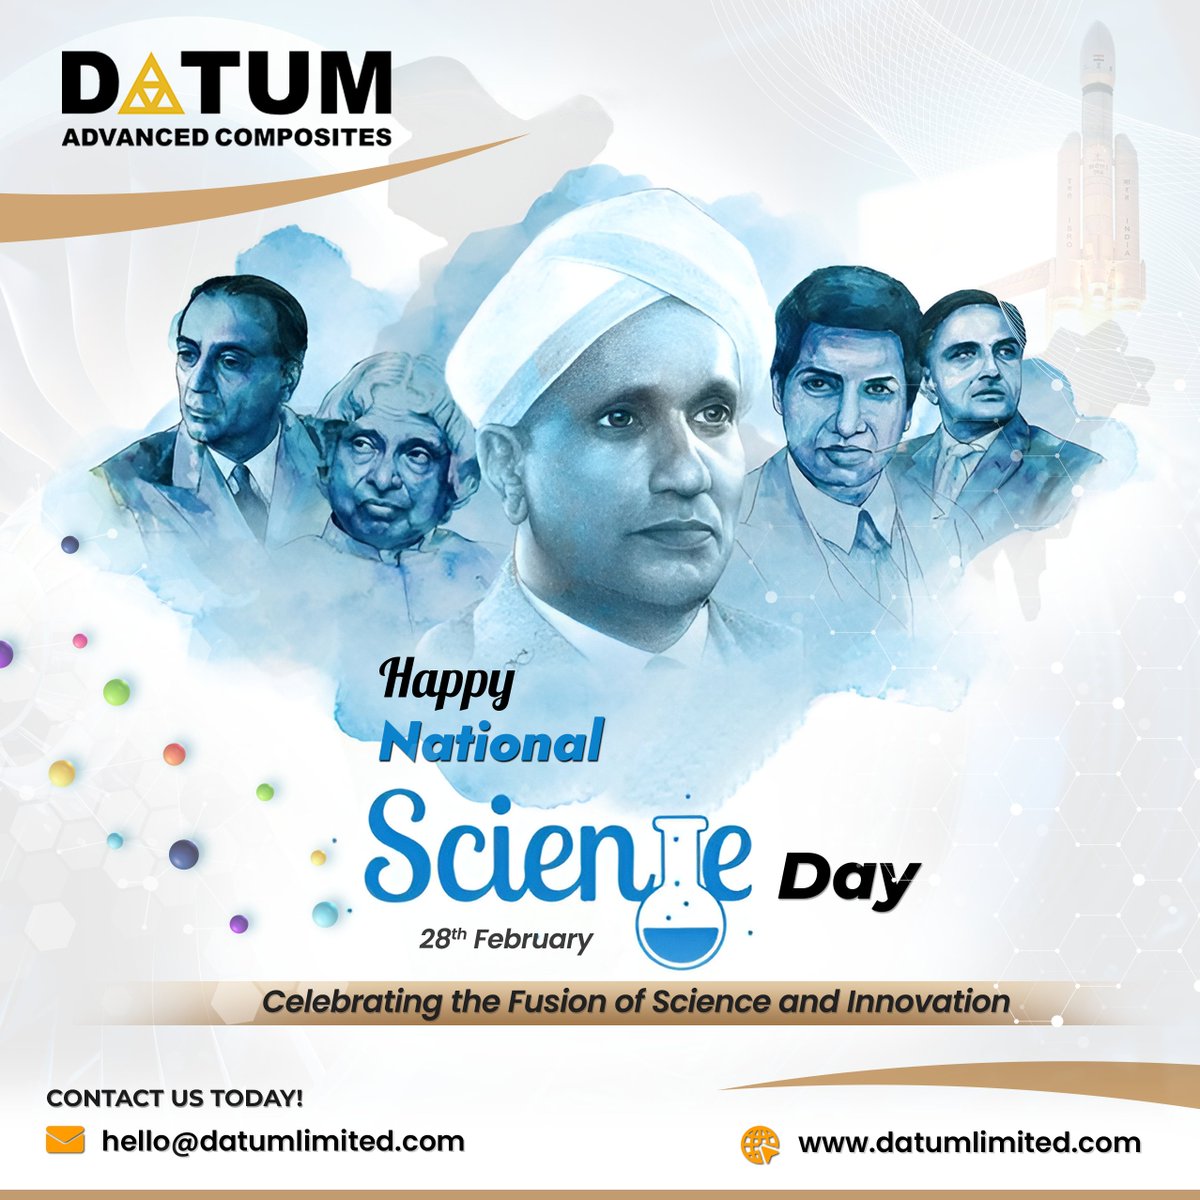 Today, we honor the pioneers of science, whose relentless pursuit of truth has illuminated our world. Happy National Science Day!
.
.
#ScienceDay #CelebrateScience #ScienceForAll #DatumAdvancedComposites #datum #ScienceForFuture #EducateThroughScience #NationalScienceDay